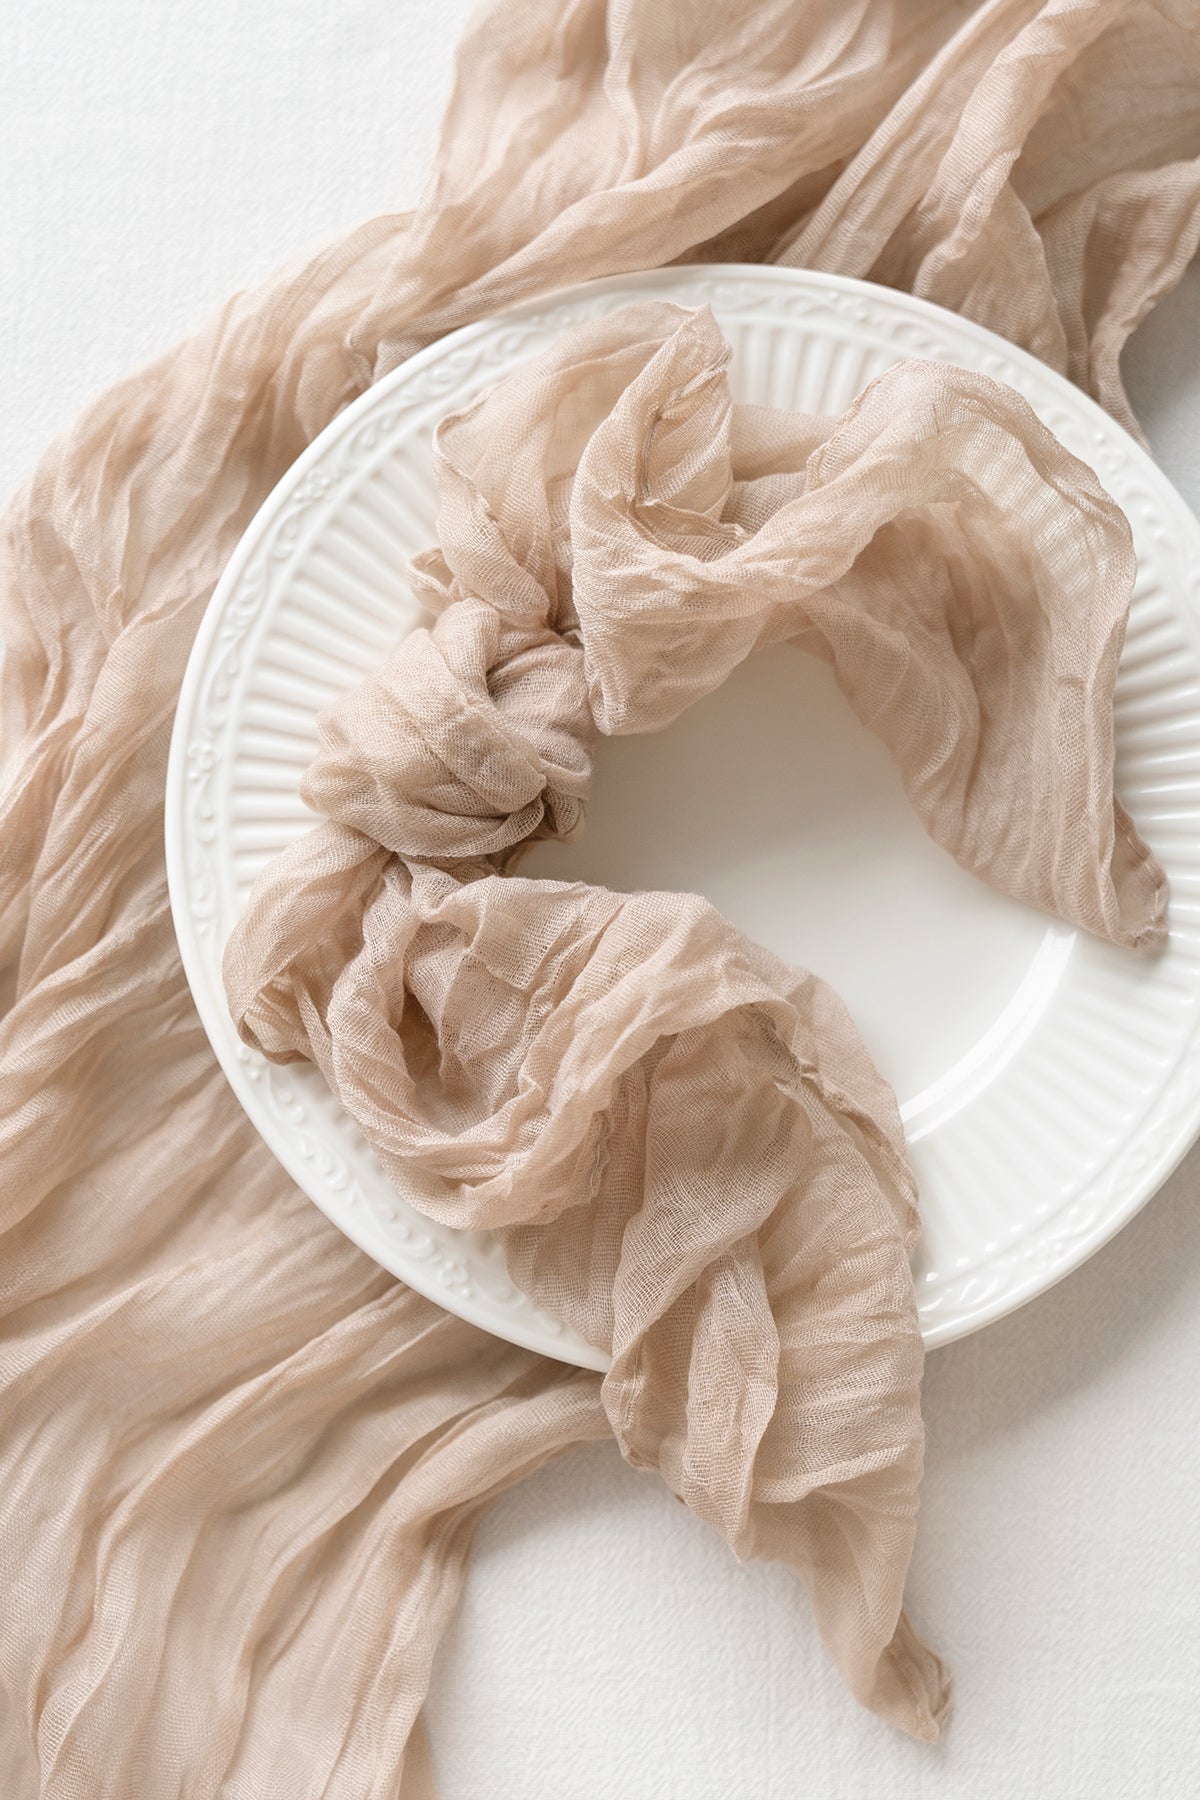 Cheesecloth Napkins & Table Runner Set for Reception - 6 Colors